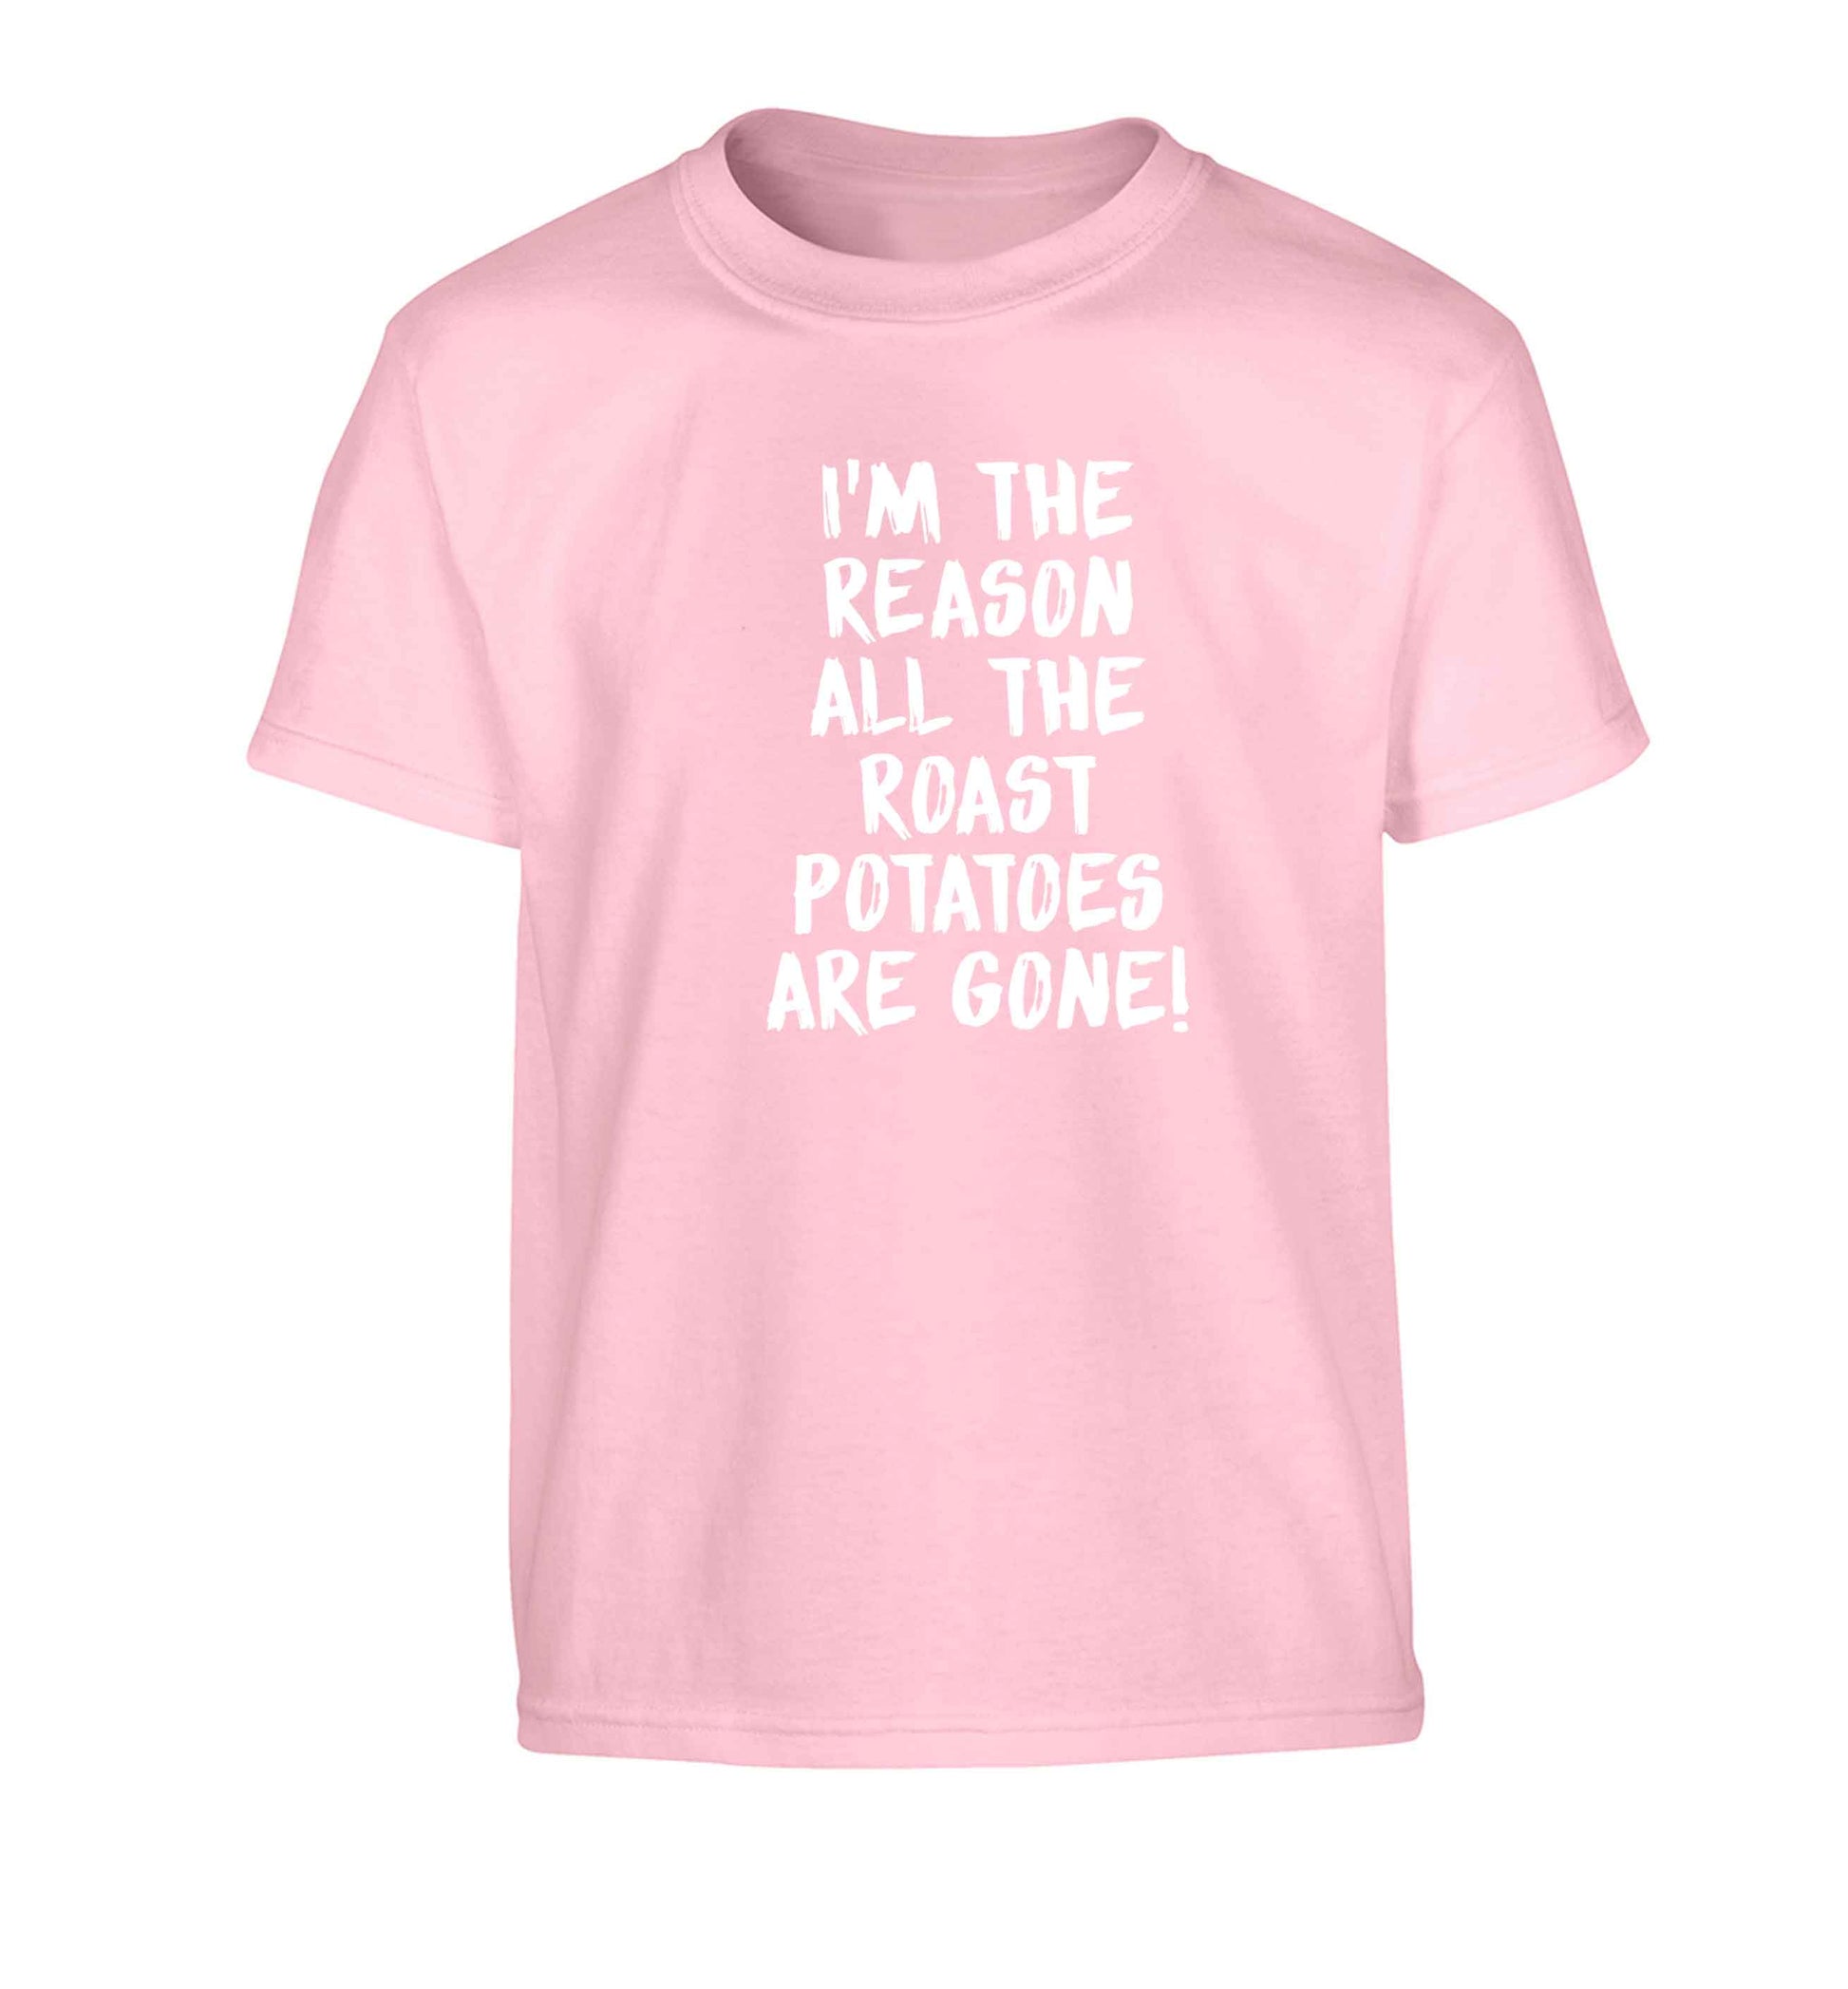 I'm the reason all the roast potatoes are gone Children's light pink Tshirt 12-13 Years